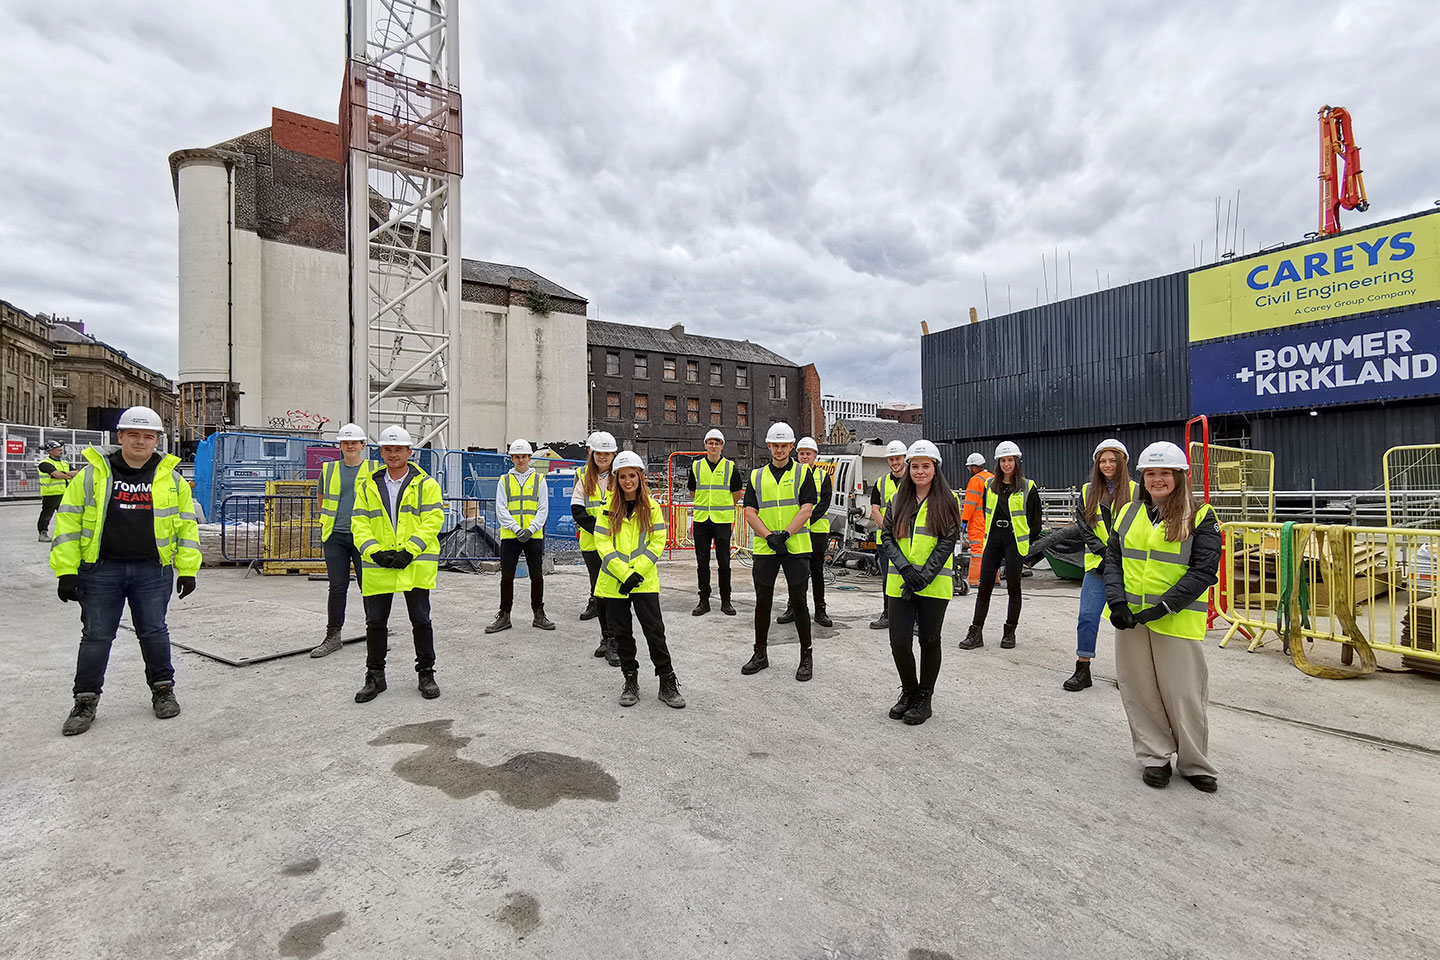 About a dozen of the PlanBEE cohort on a building site stood in hi-vis and hard hats